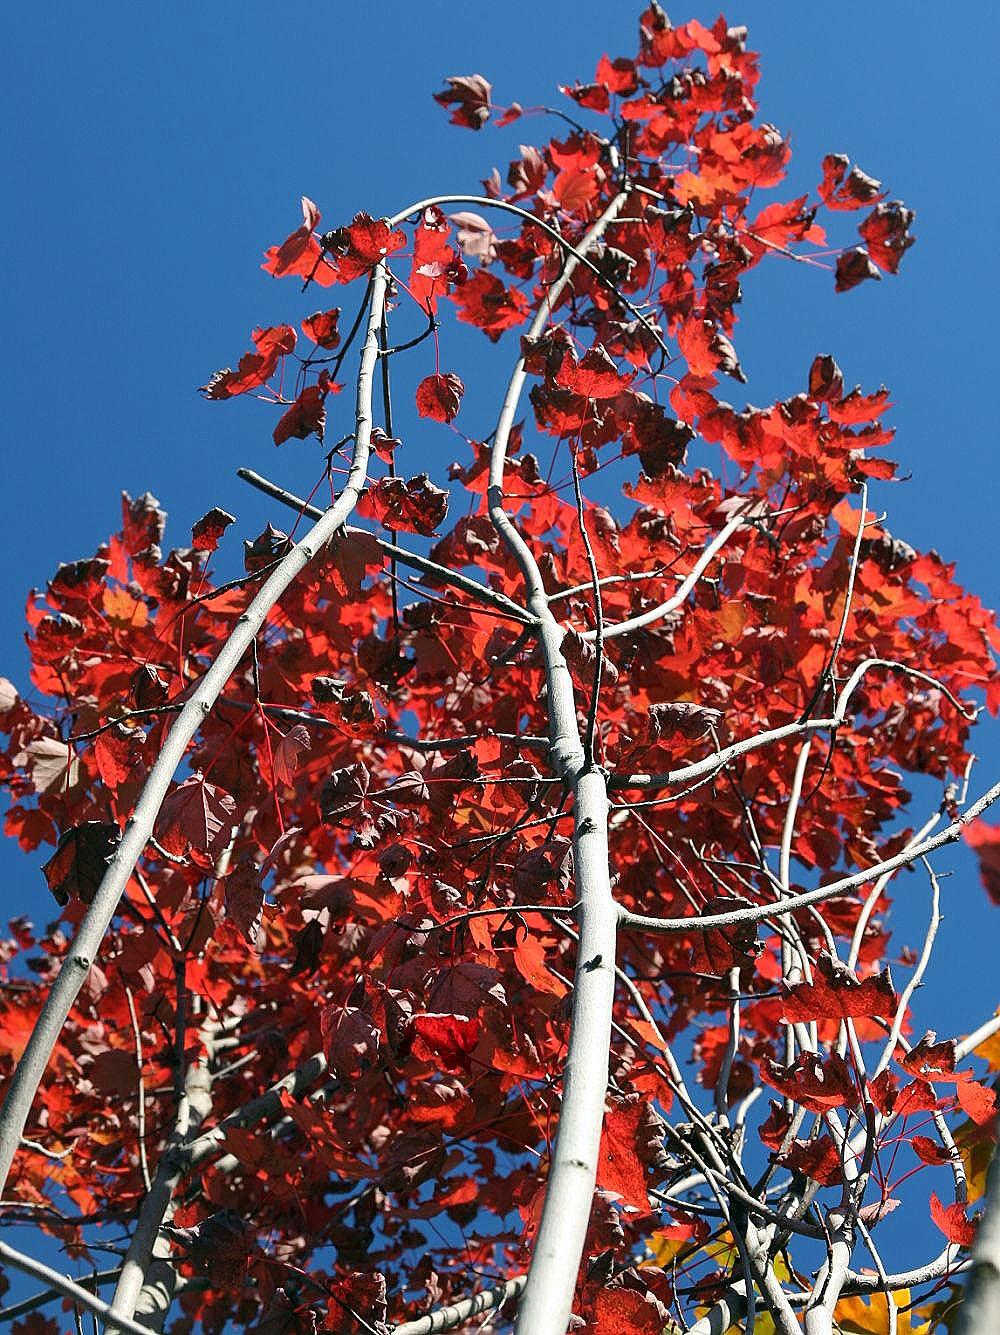 red leaves with beige-white branches and trunks